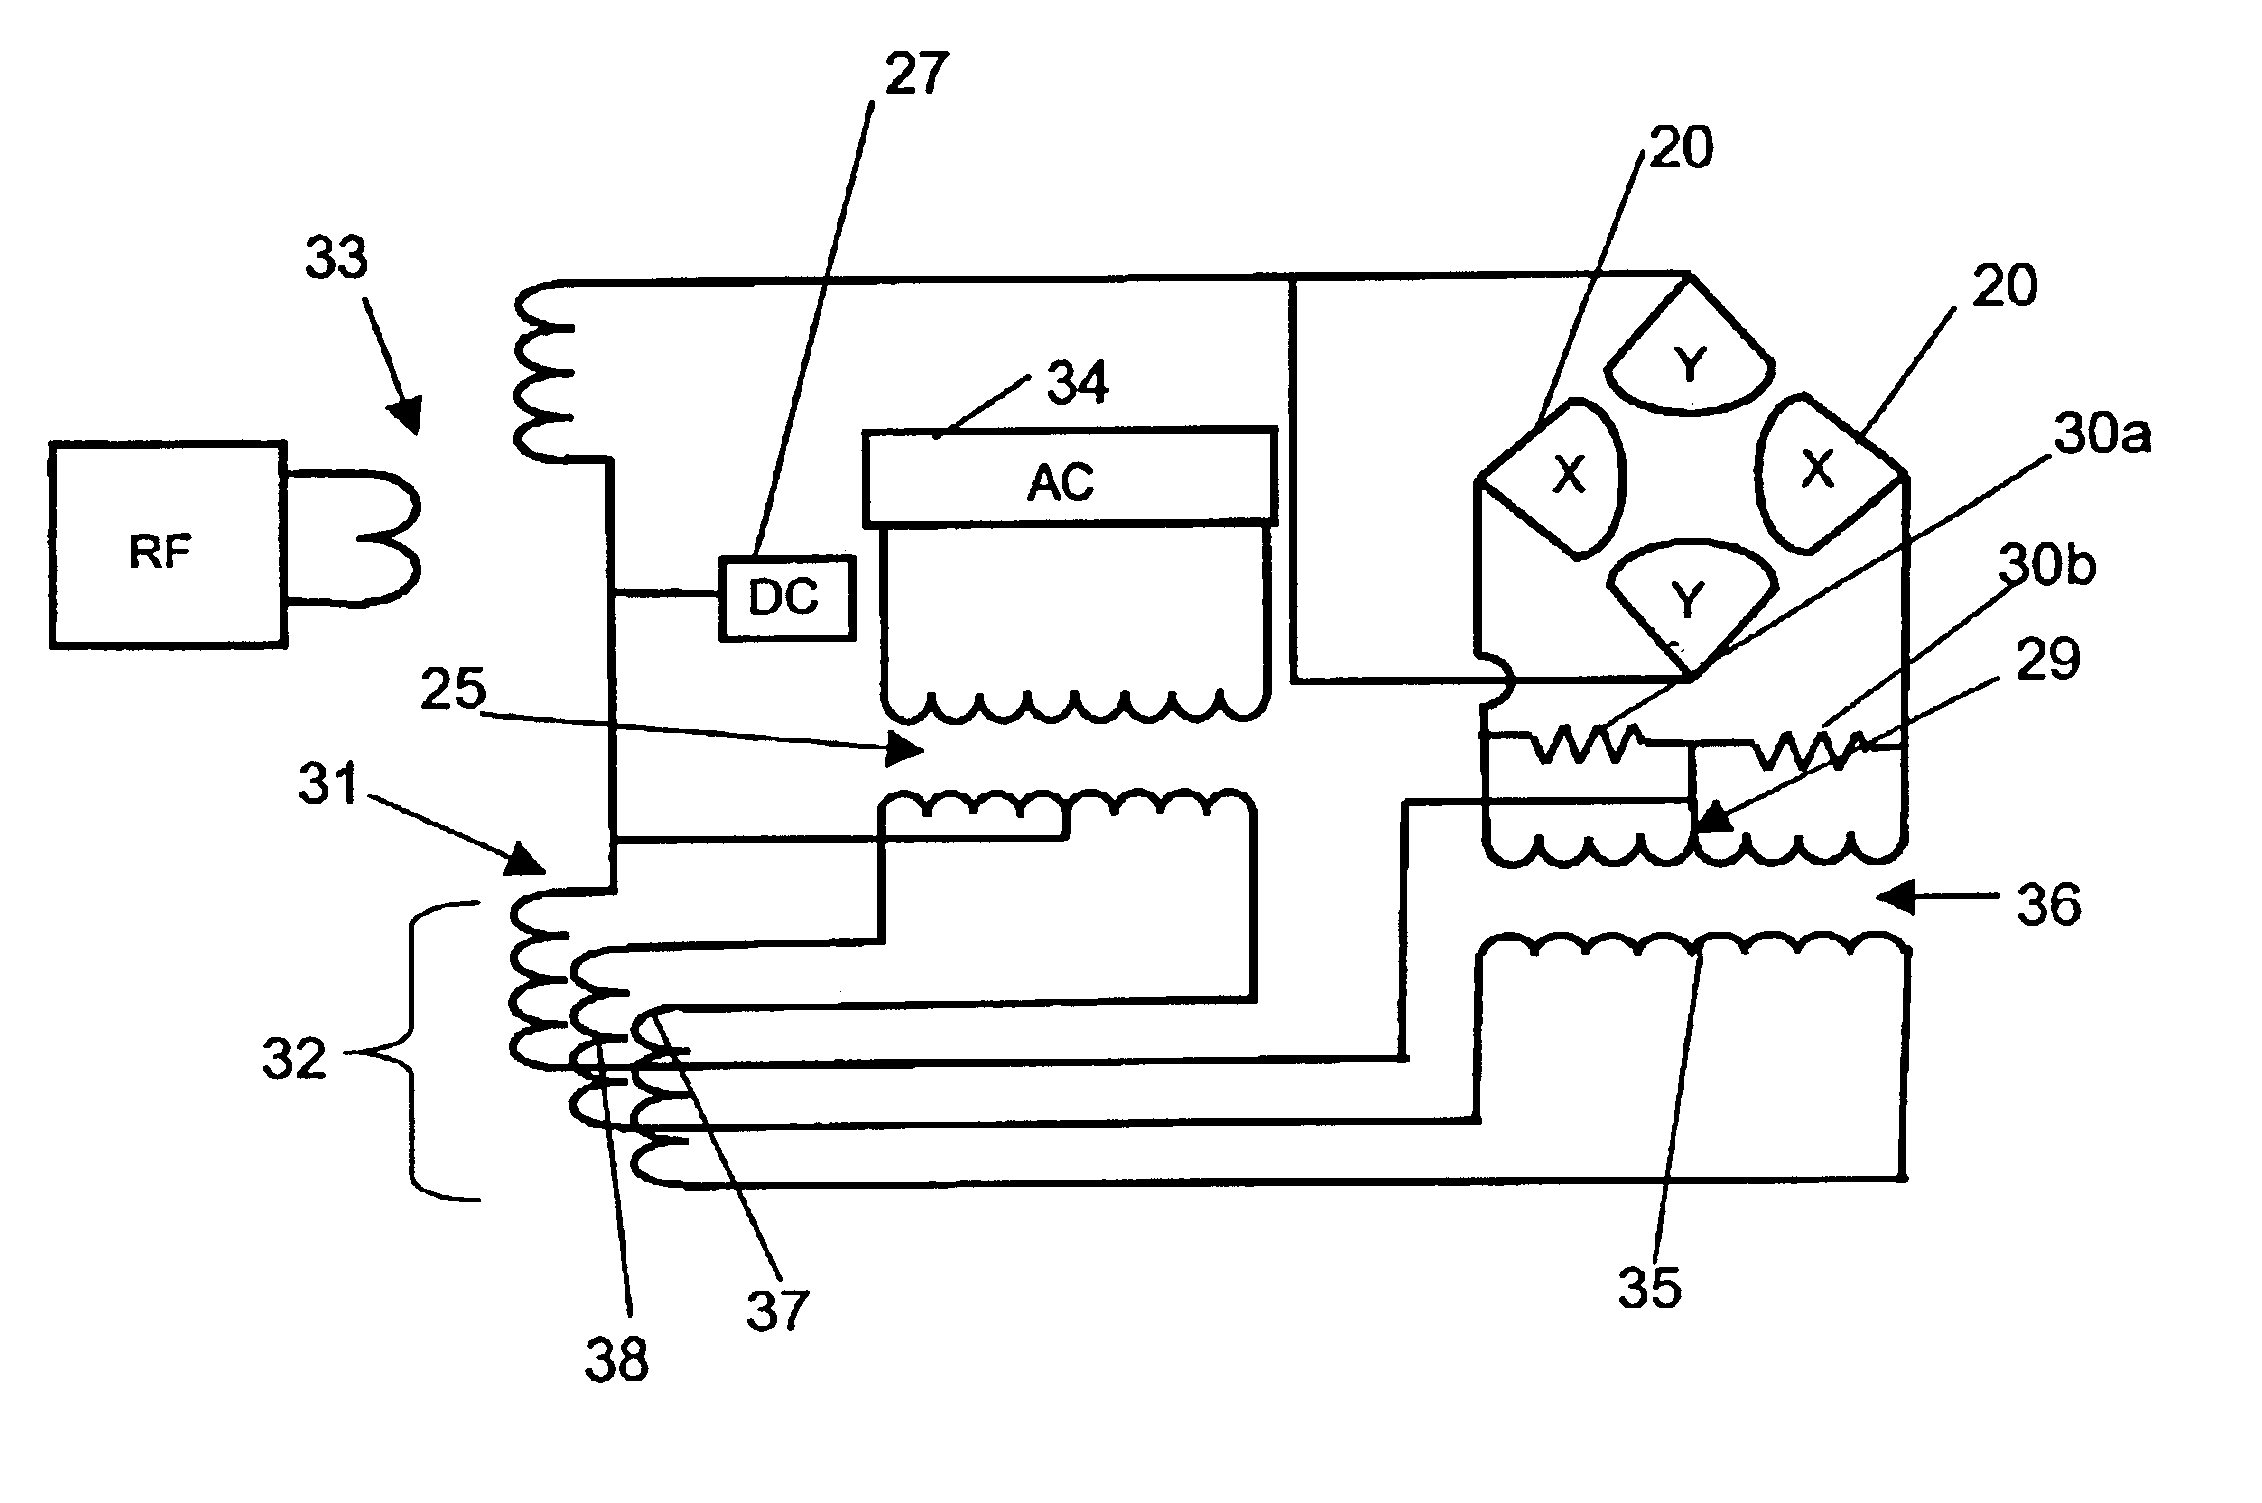 Circuit for applying supplementary voltages to RF multipole devices